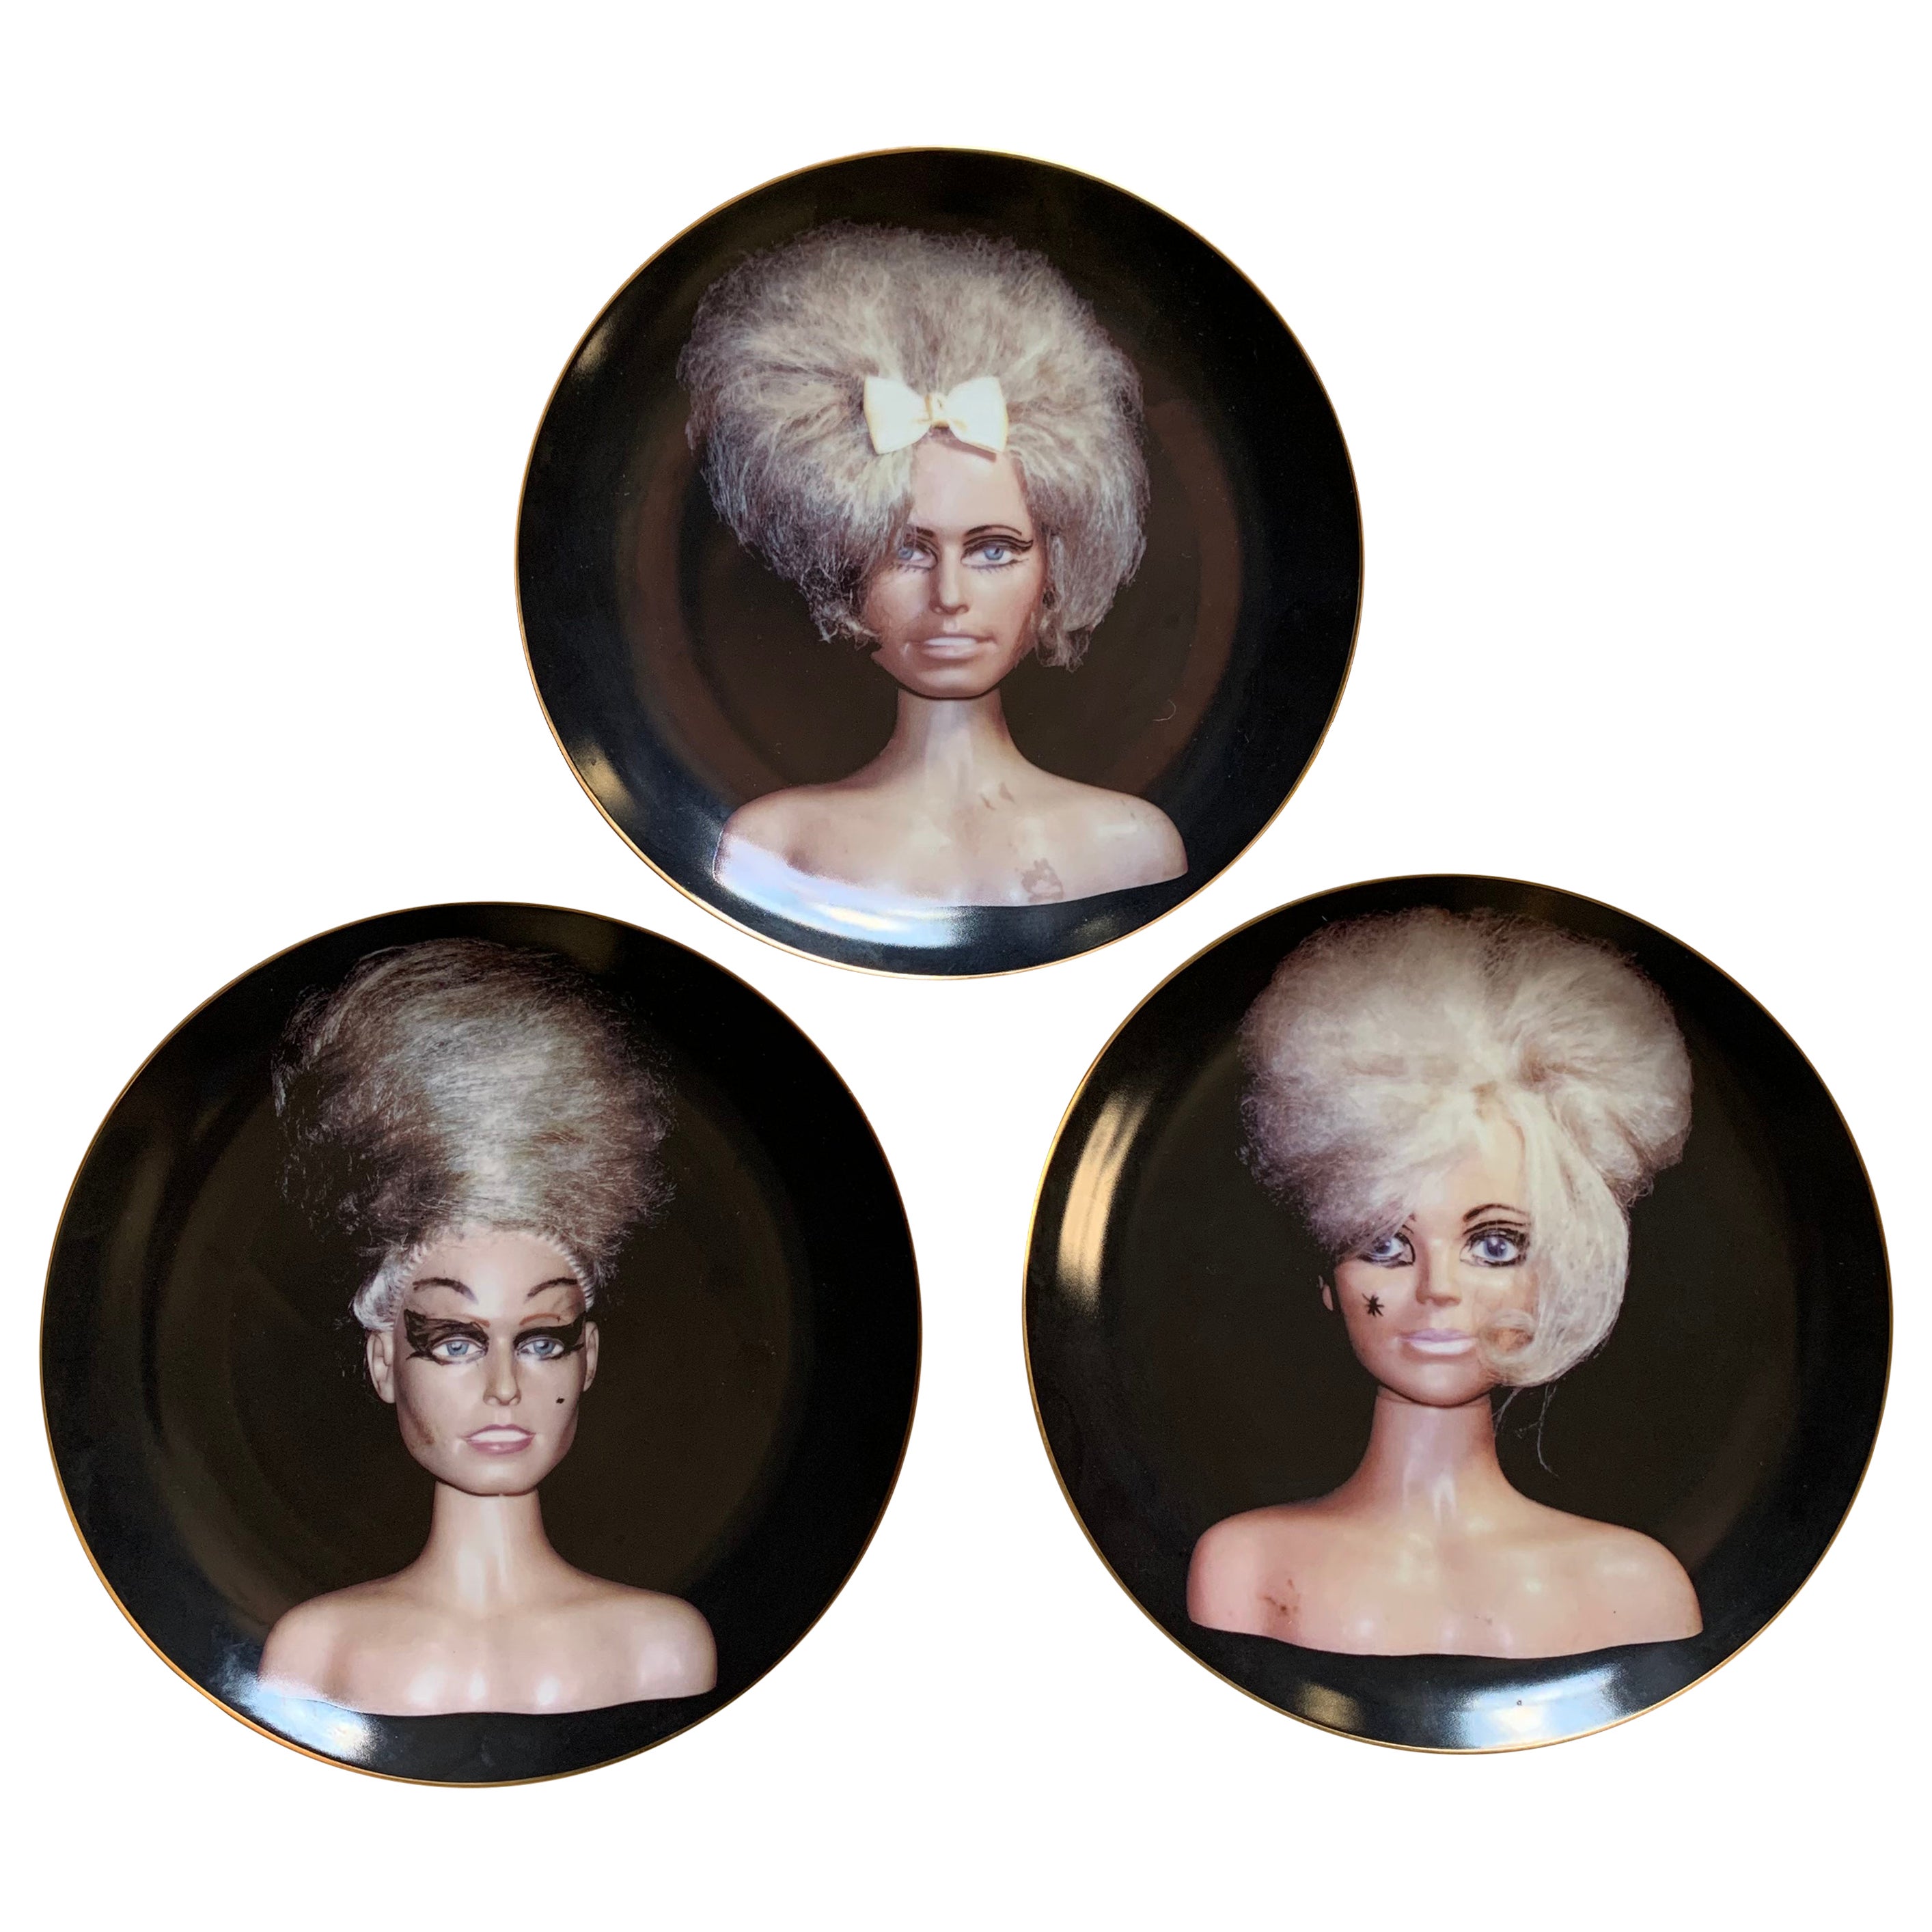 'The Girls’ Set of 3 Plates by John Waters, Limited Edition Set of 300 